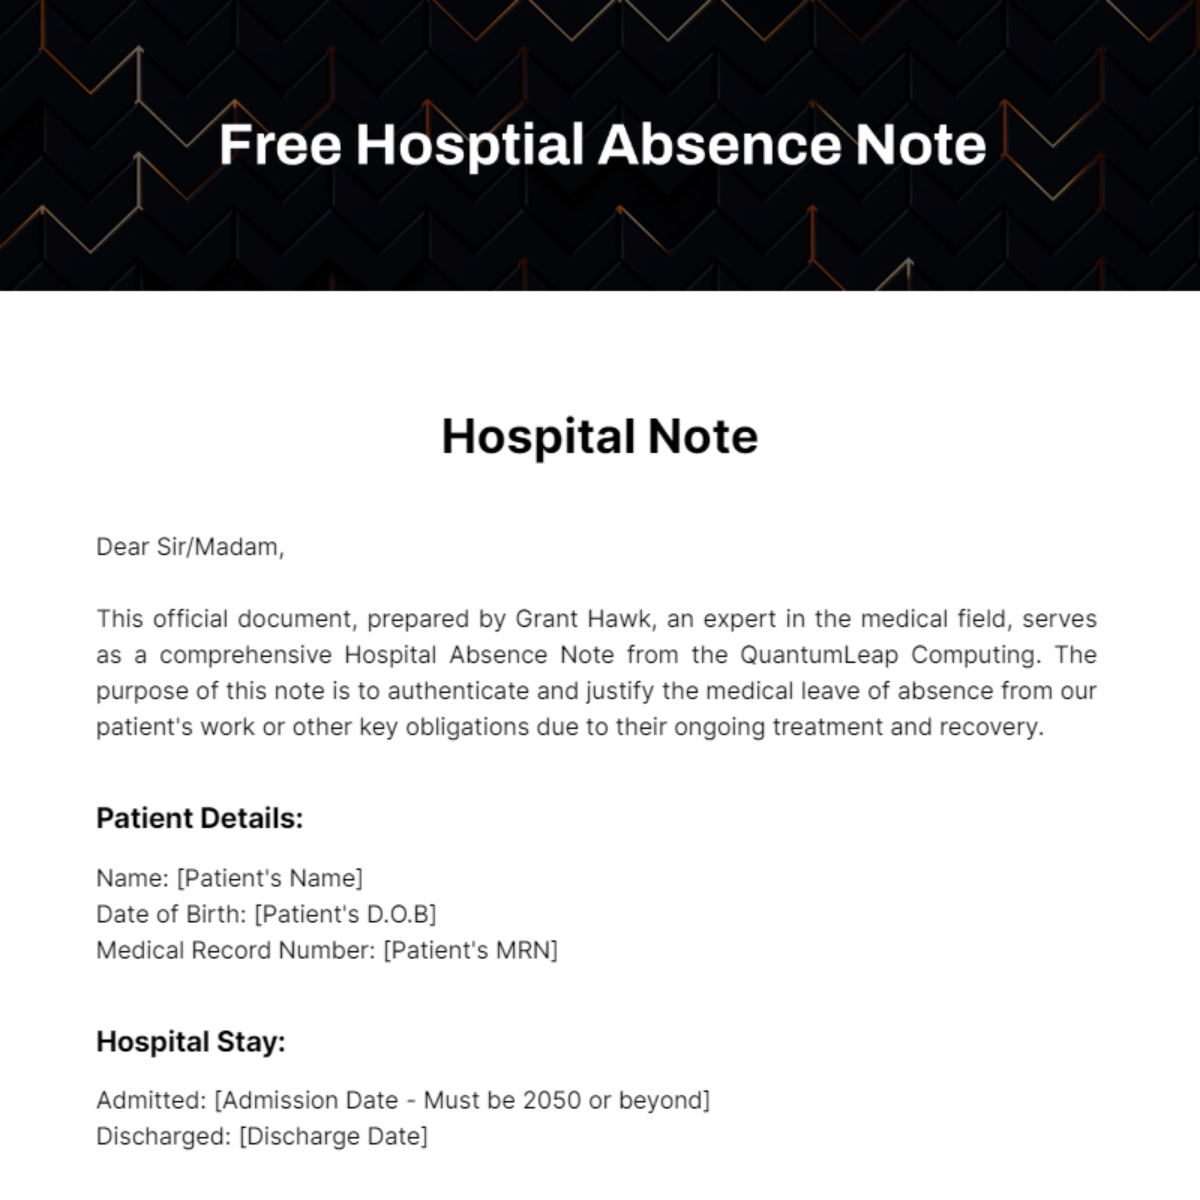 Free Hosptial Absence Note Template